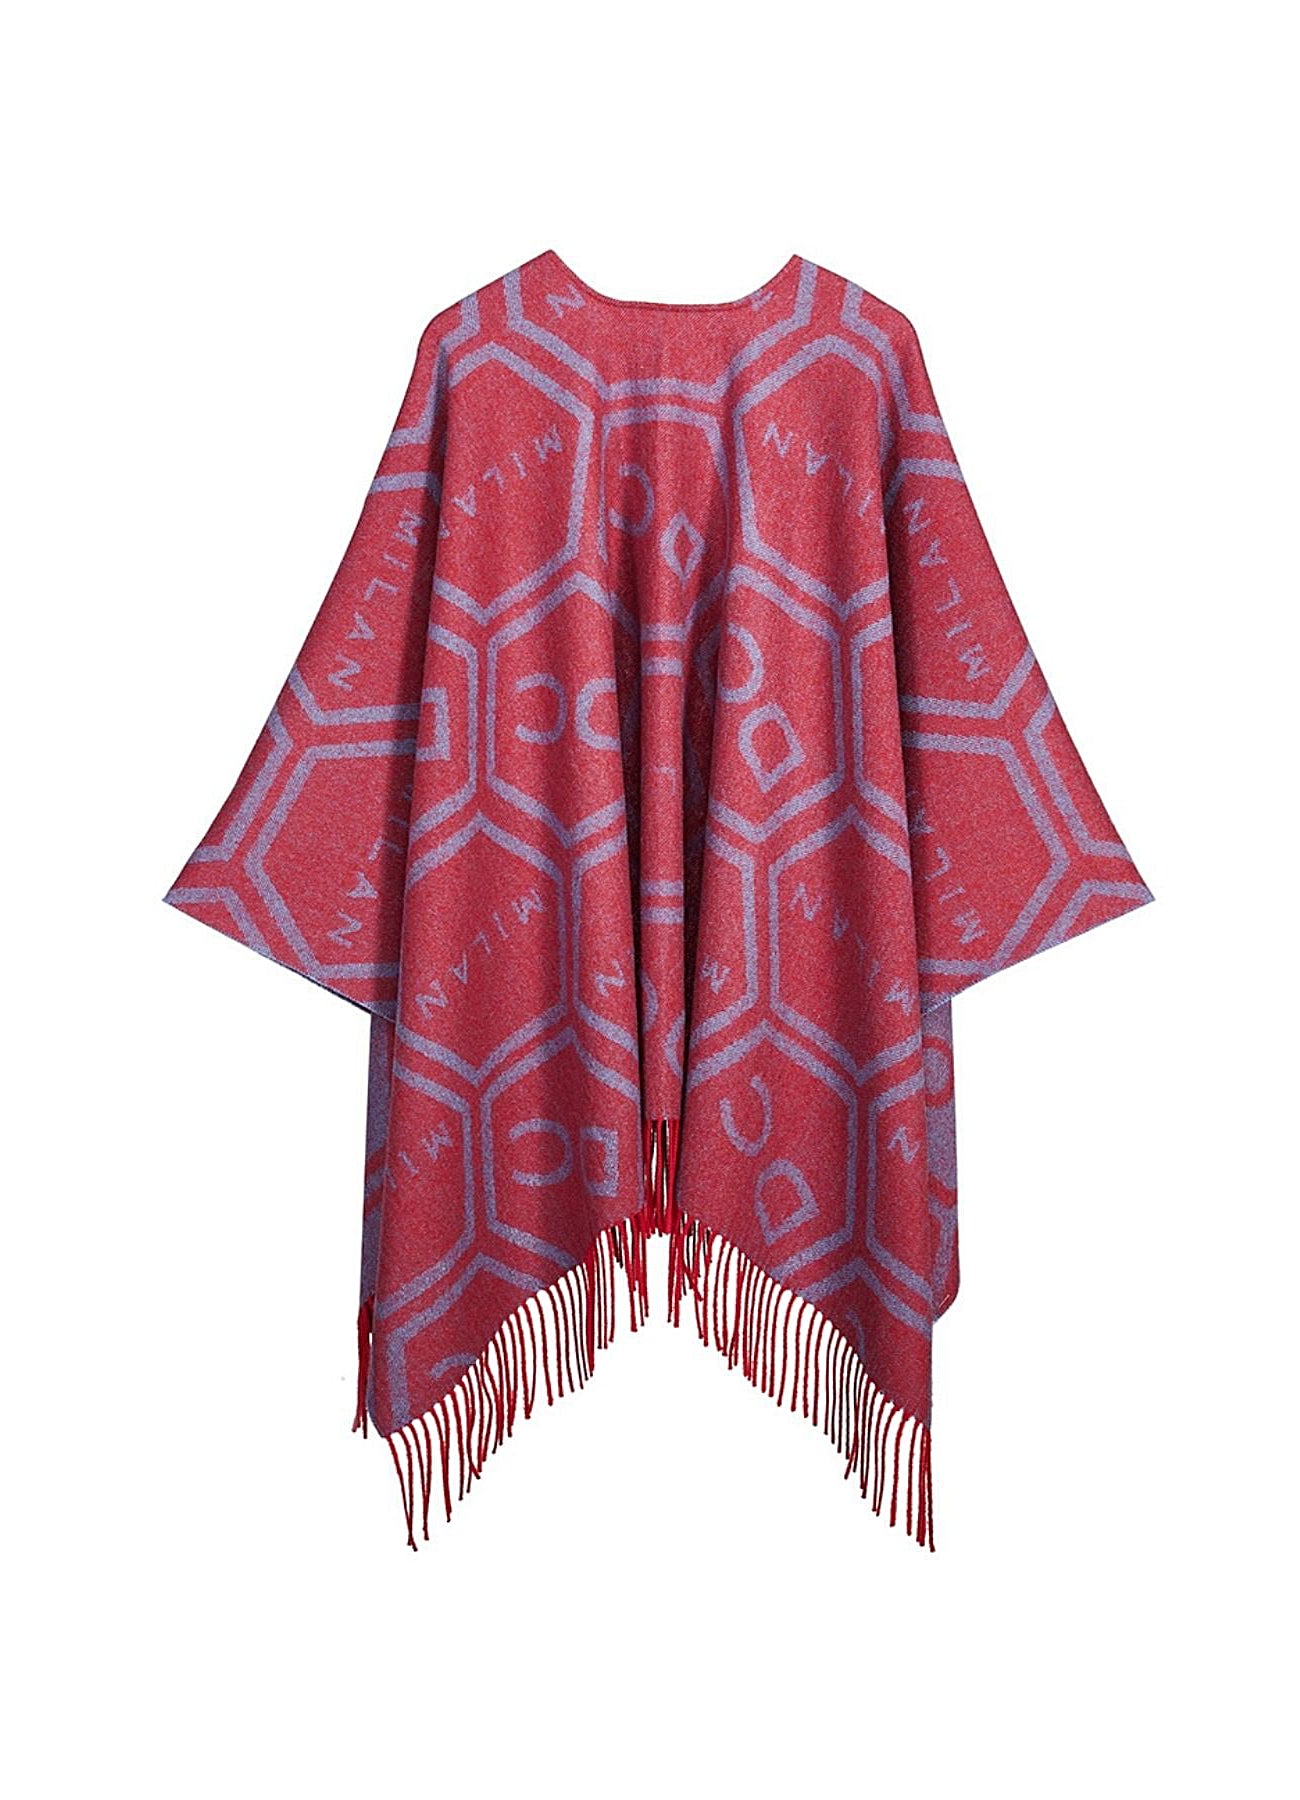 Cape Poncho Exclusive Iconic Reversible Design Red